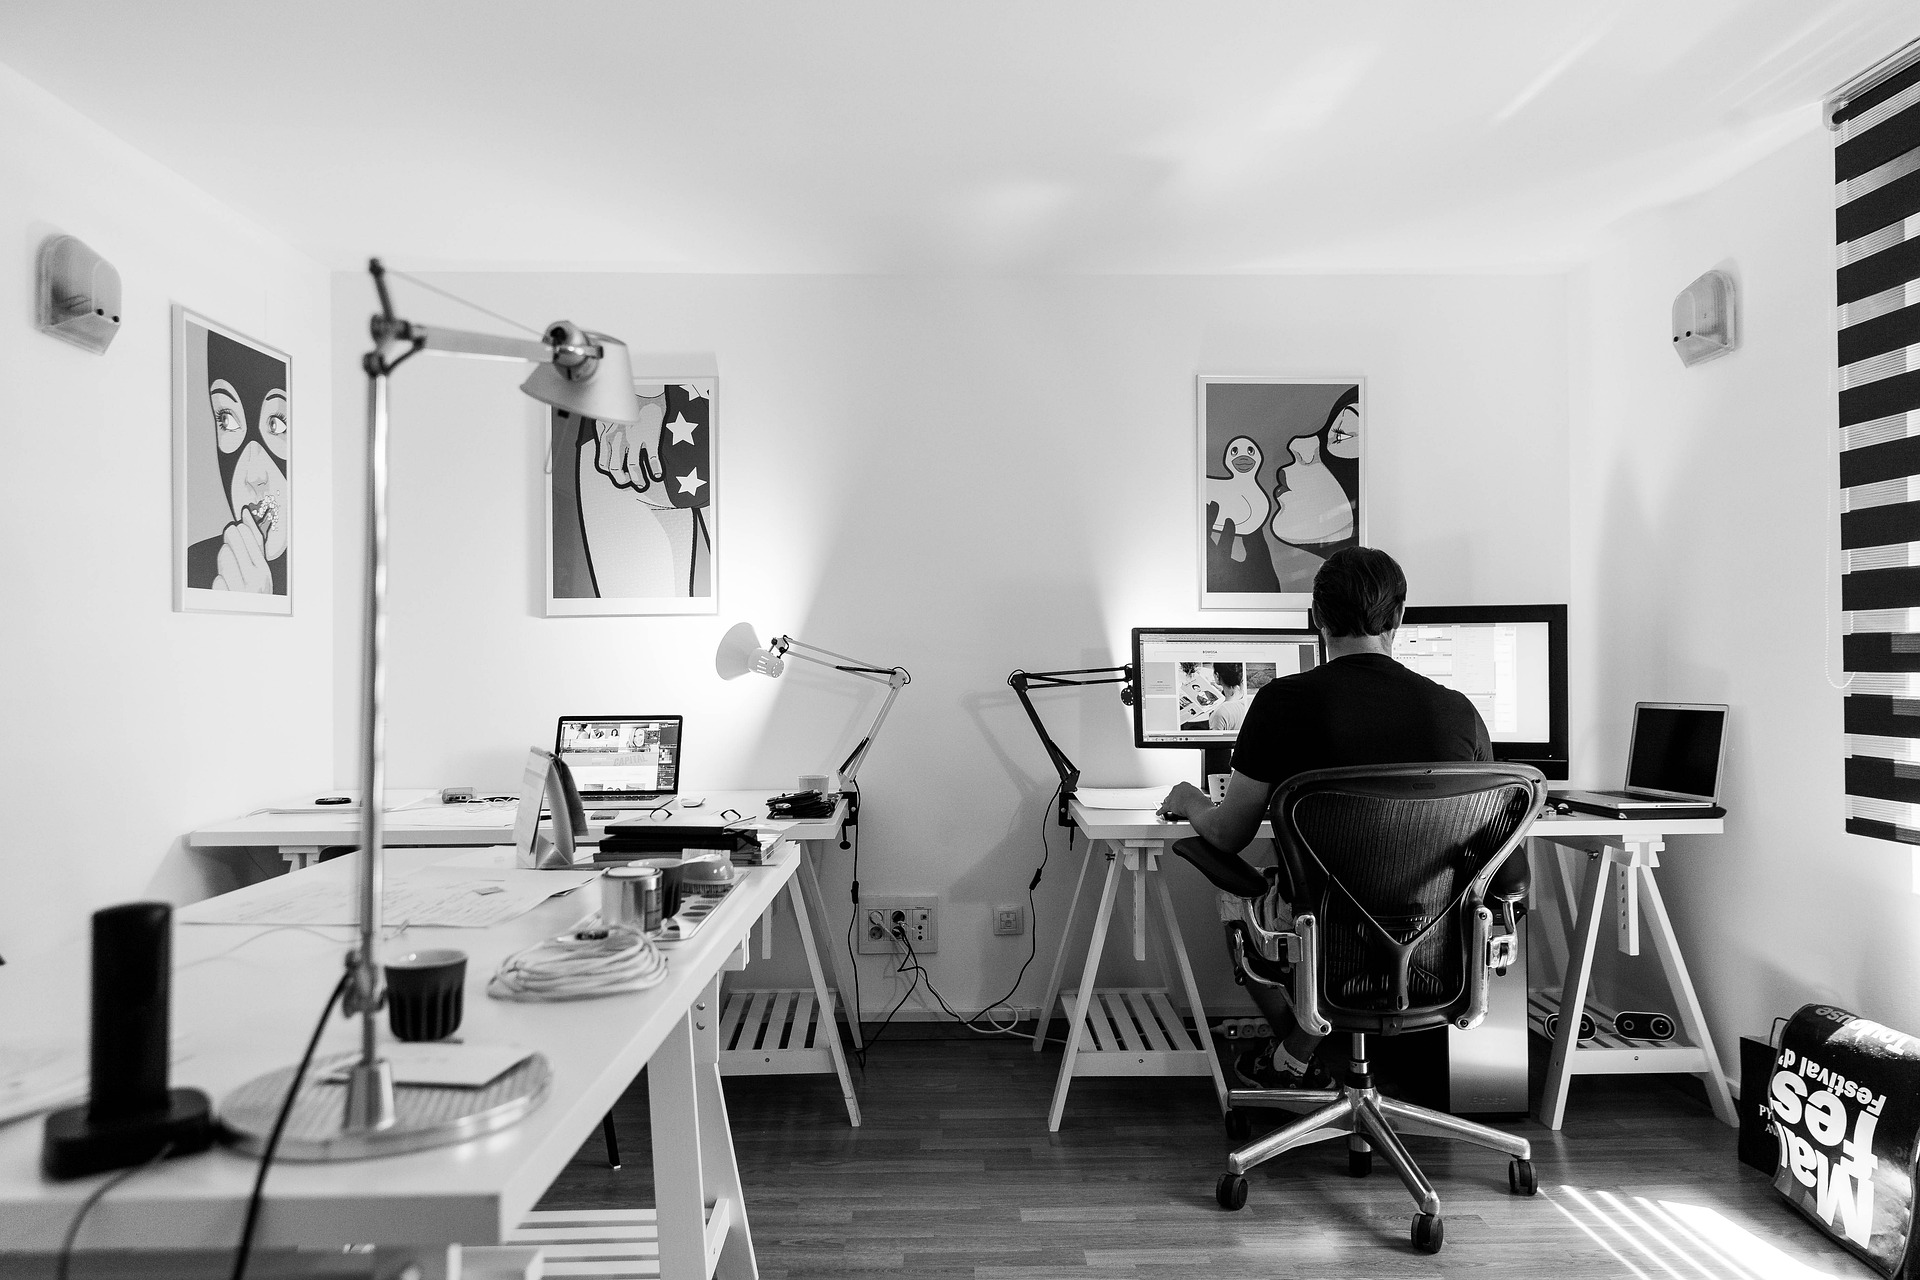 Study: Remote Workers 23% More Productive Than Office Workers